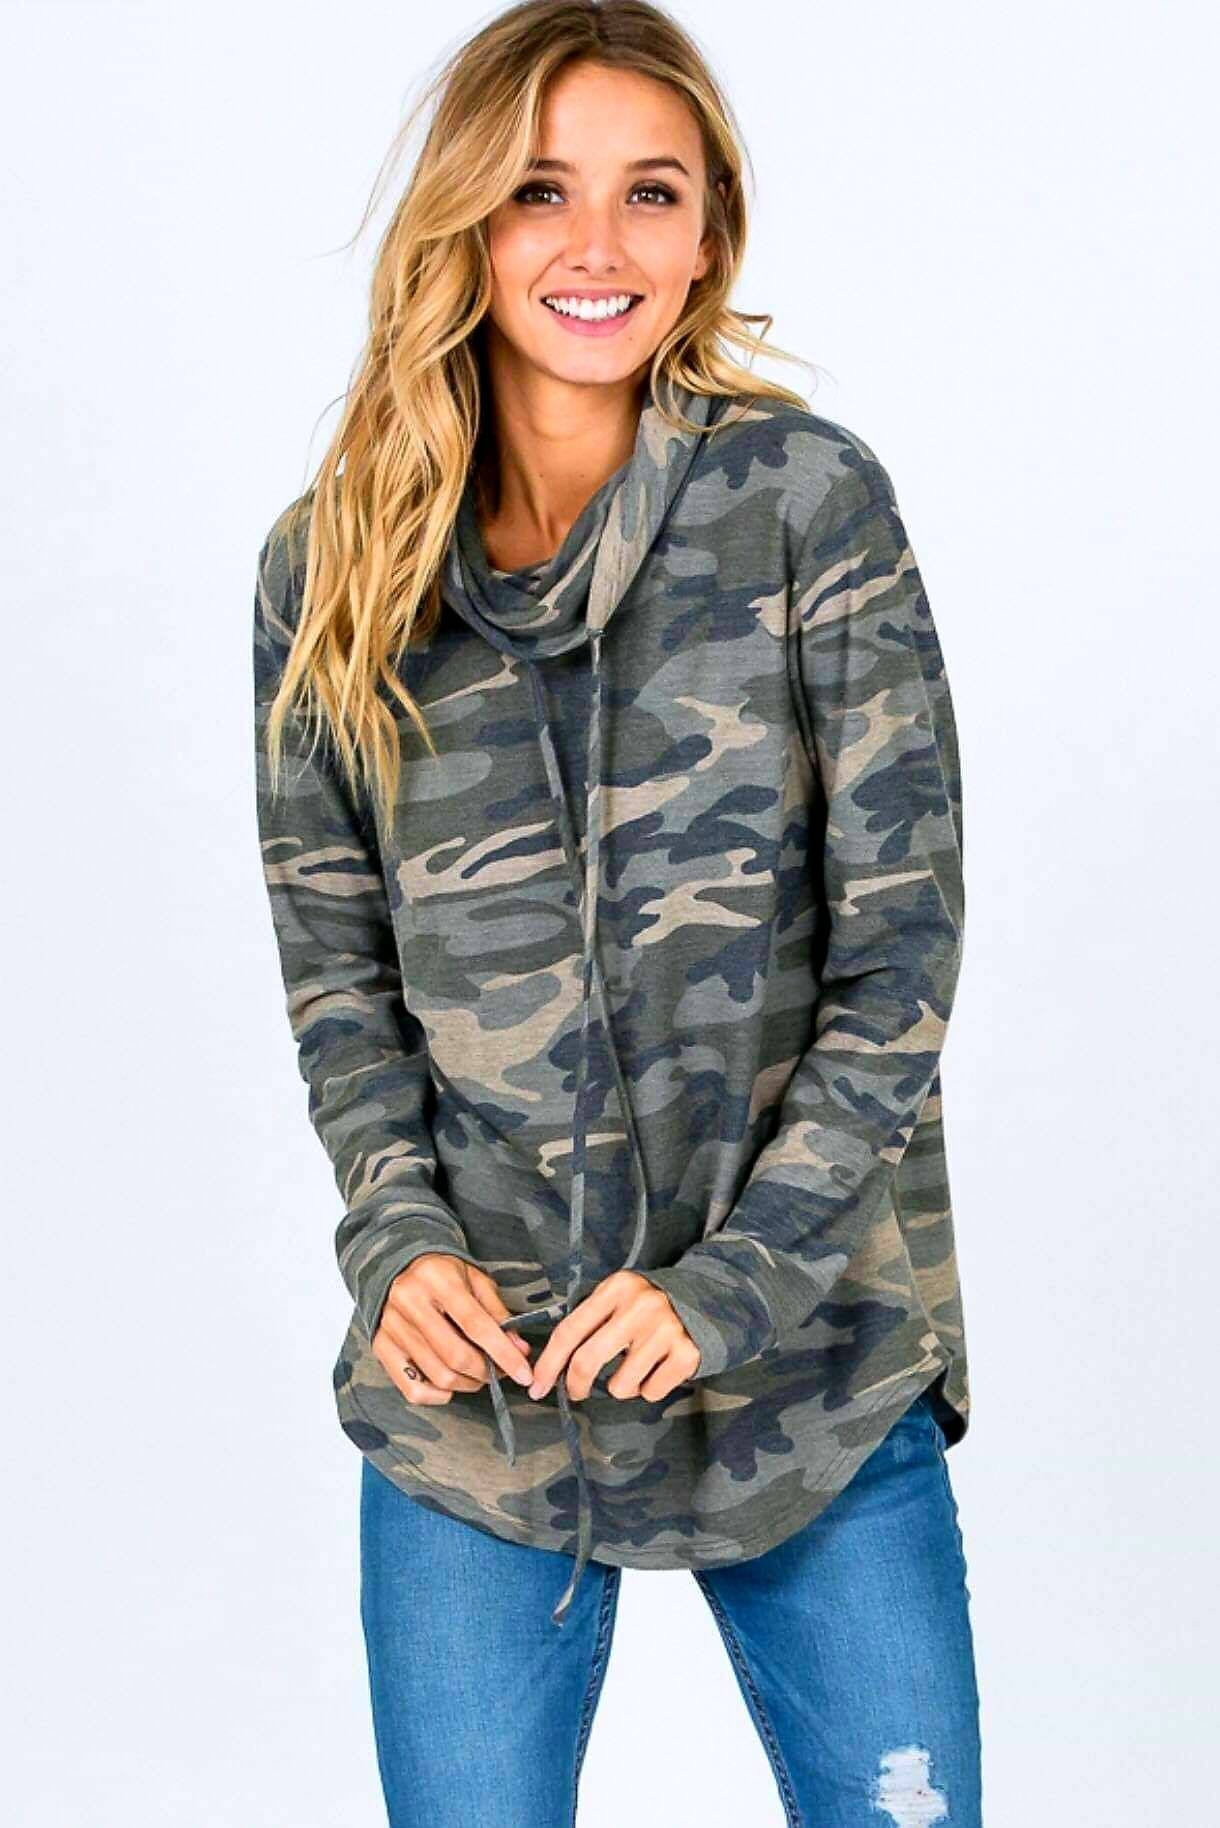 Monogrammed Camo Cowl Neck Pullover - Embroidered Ladies Camouflage Cowlneck Shirt, Women's Personalized Clothing, Monogram, Camo Sweatshirt